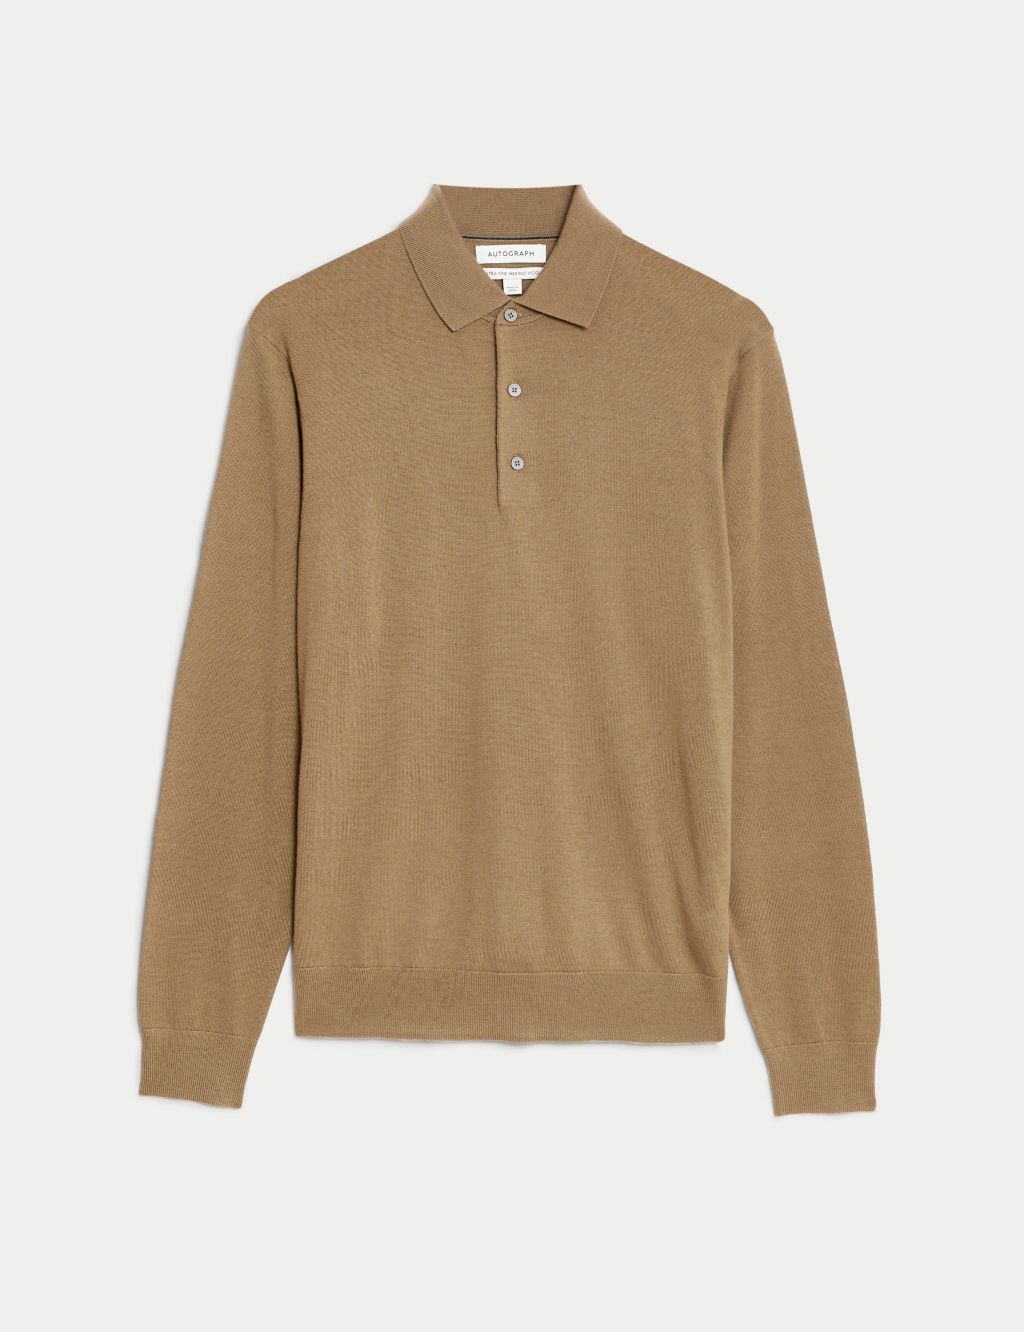 Pure Extra Fine Merino Wool Knitted Polo Shirt image 2